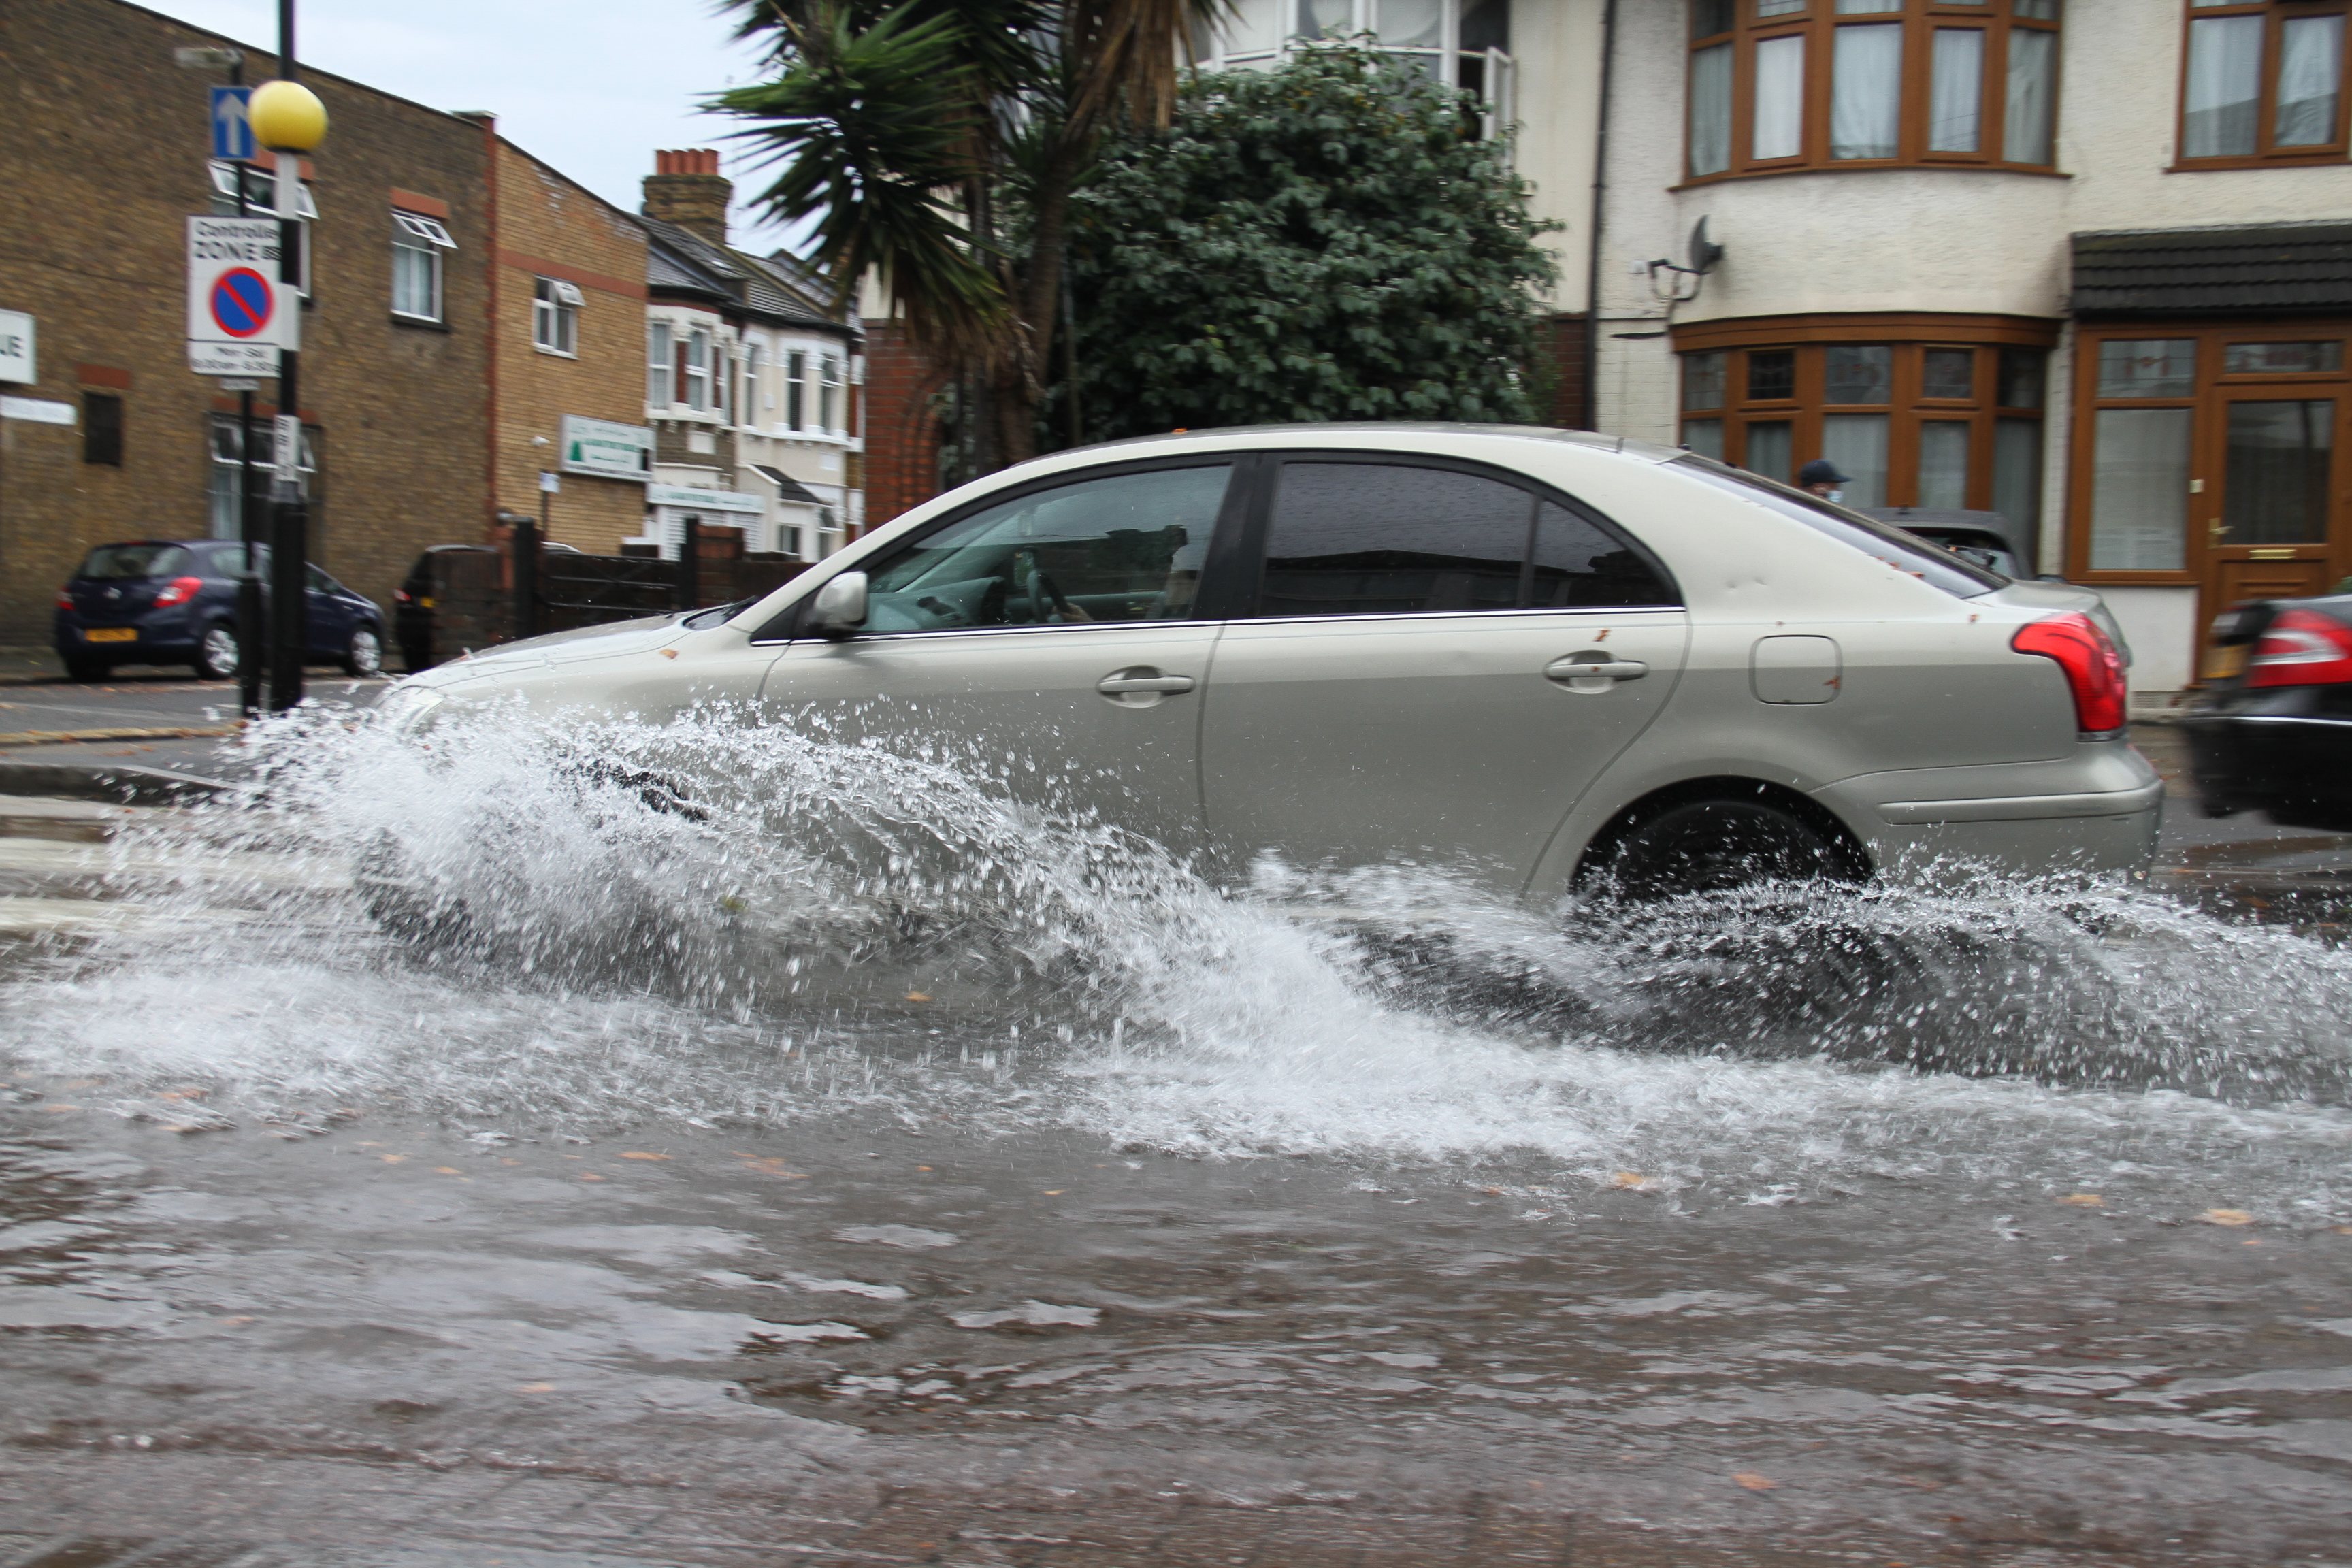 A car drives through flooding on a road in East London